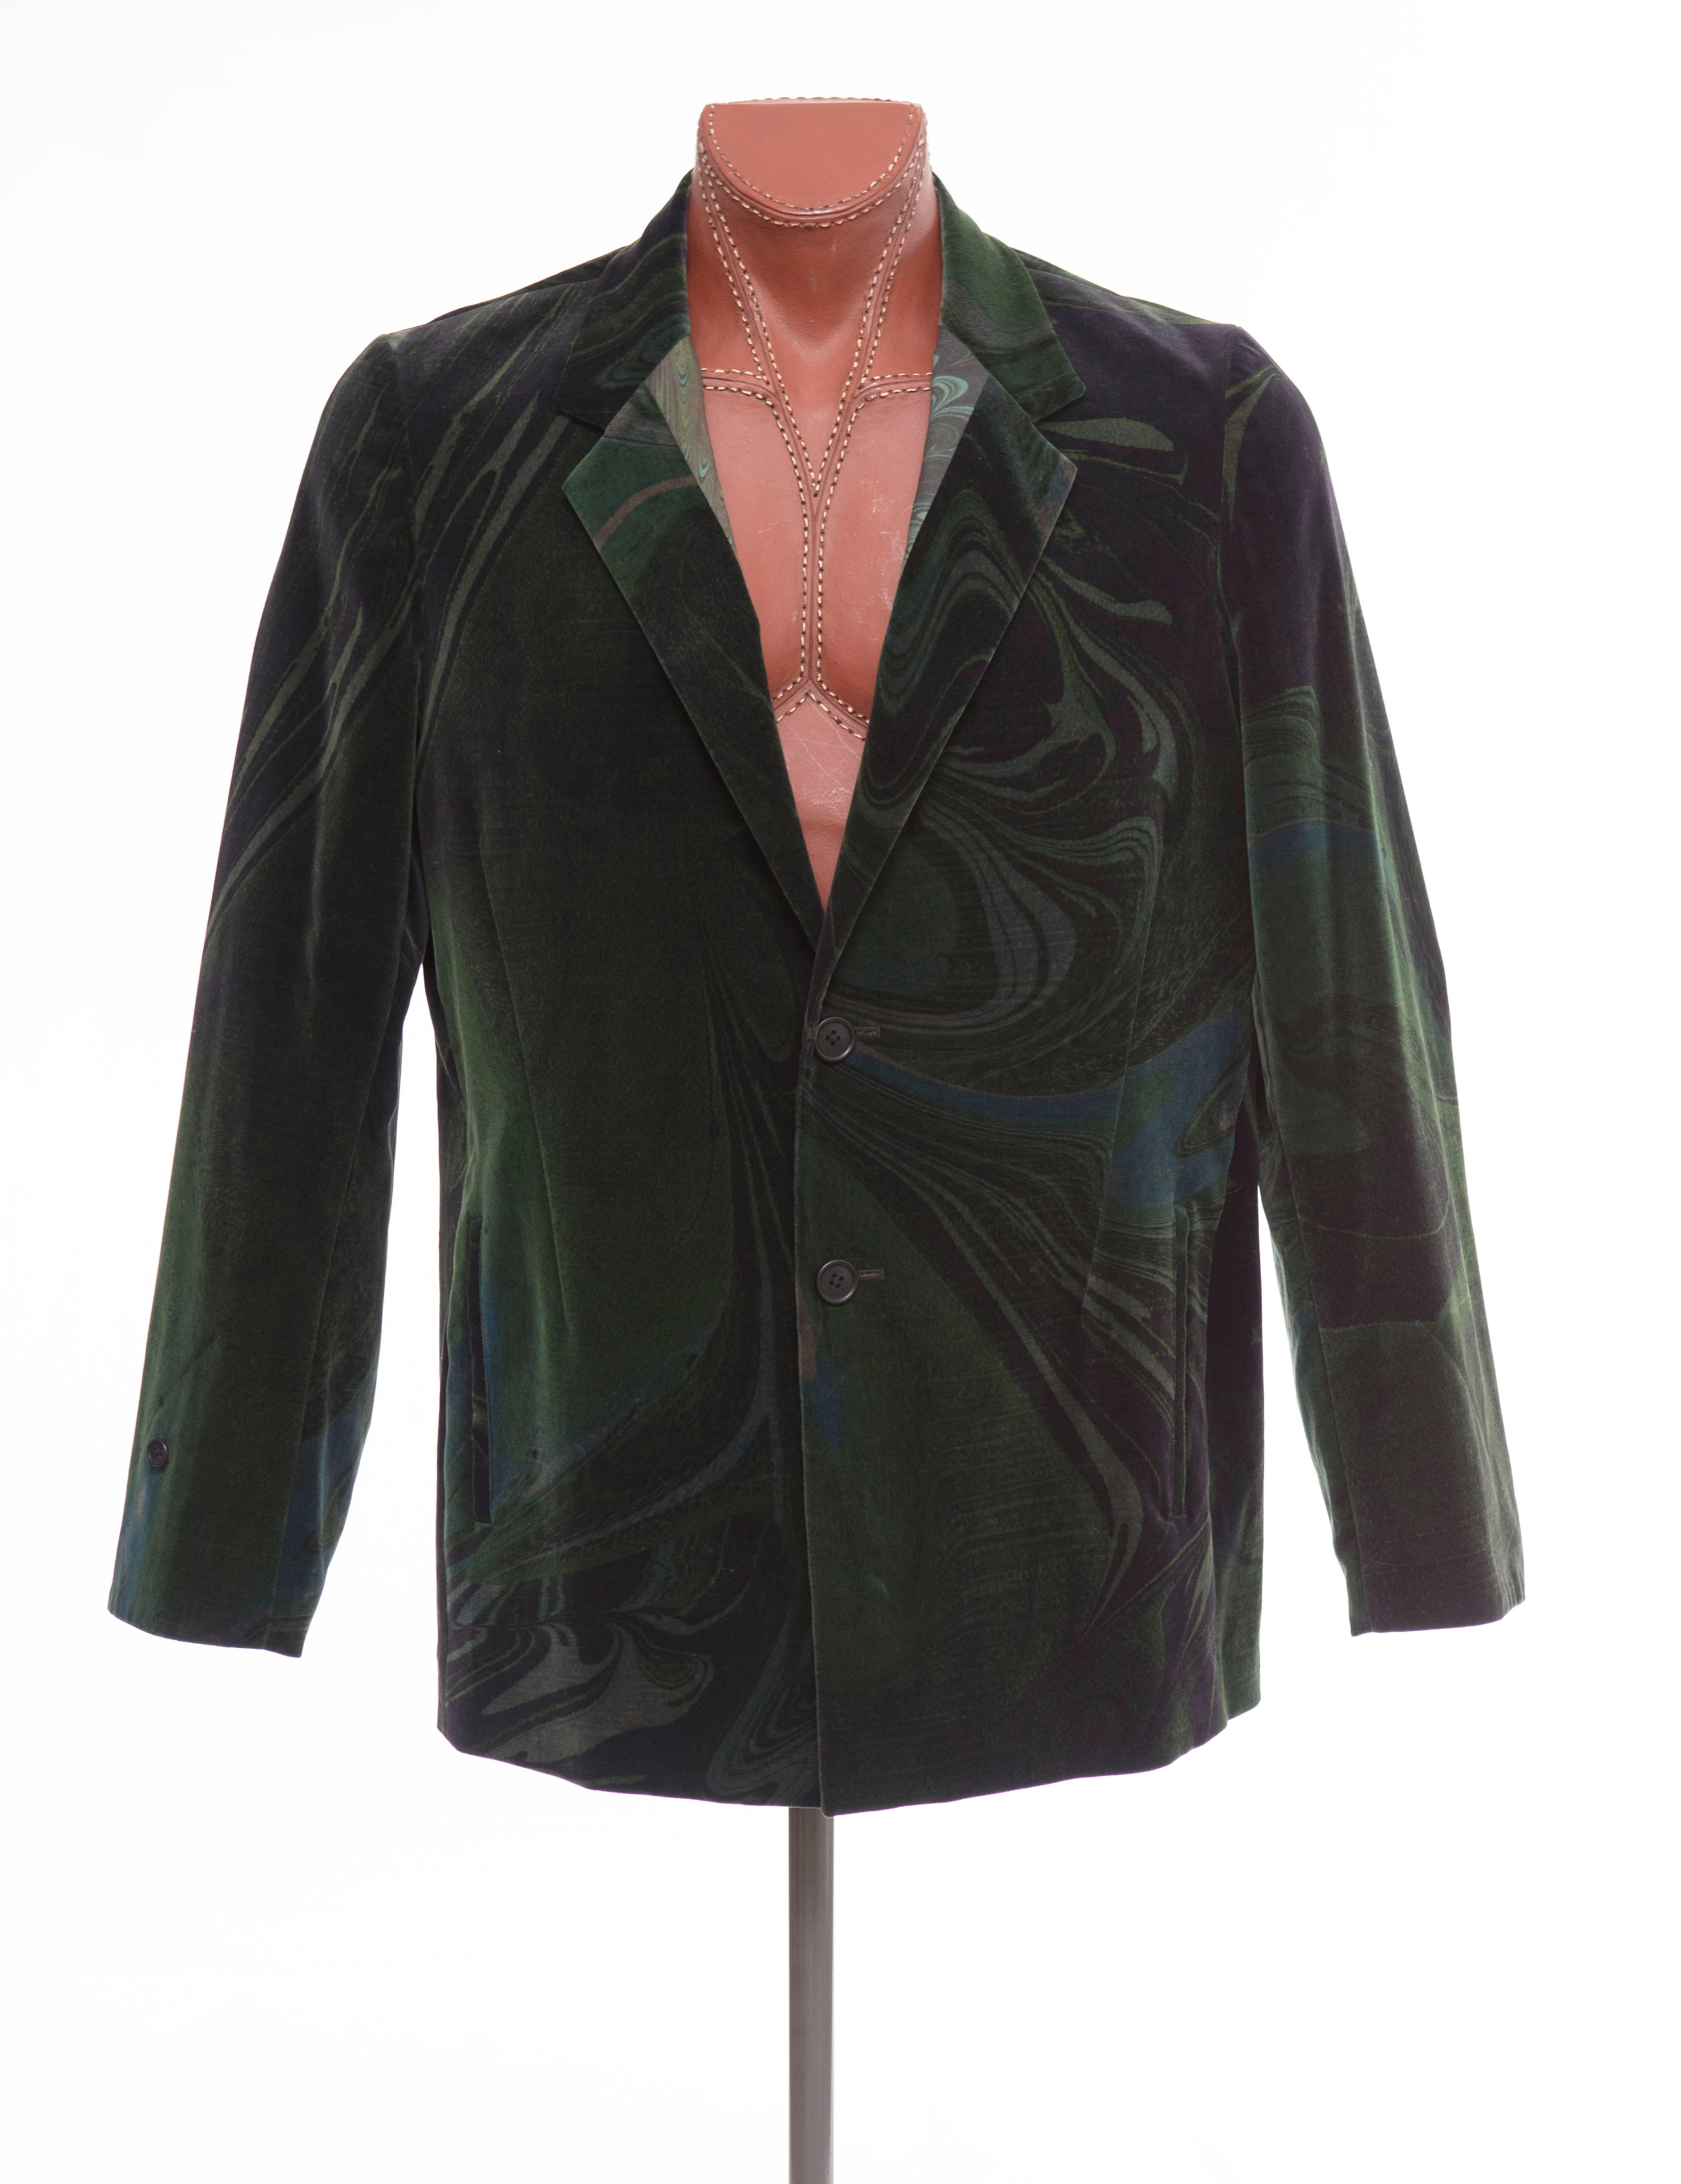 Yohji Yamamoto, Autumn-Winter 2015, men's emerald green cotton velvet blazer with wide notched lapels, structured shoulders, dual welt pockets at waist, three interior welt pockets, six functional button holes at cuffs, tonal stitching and dual